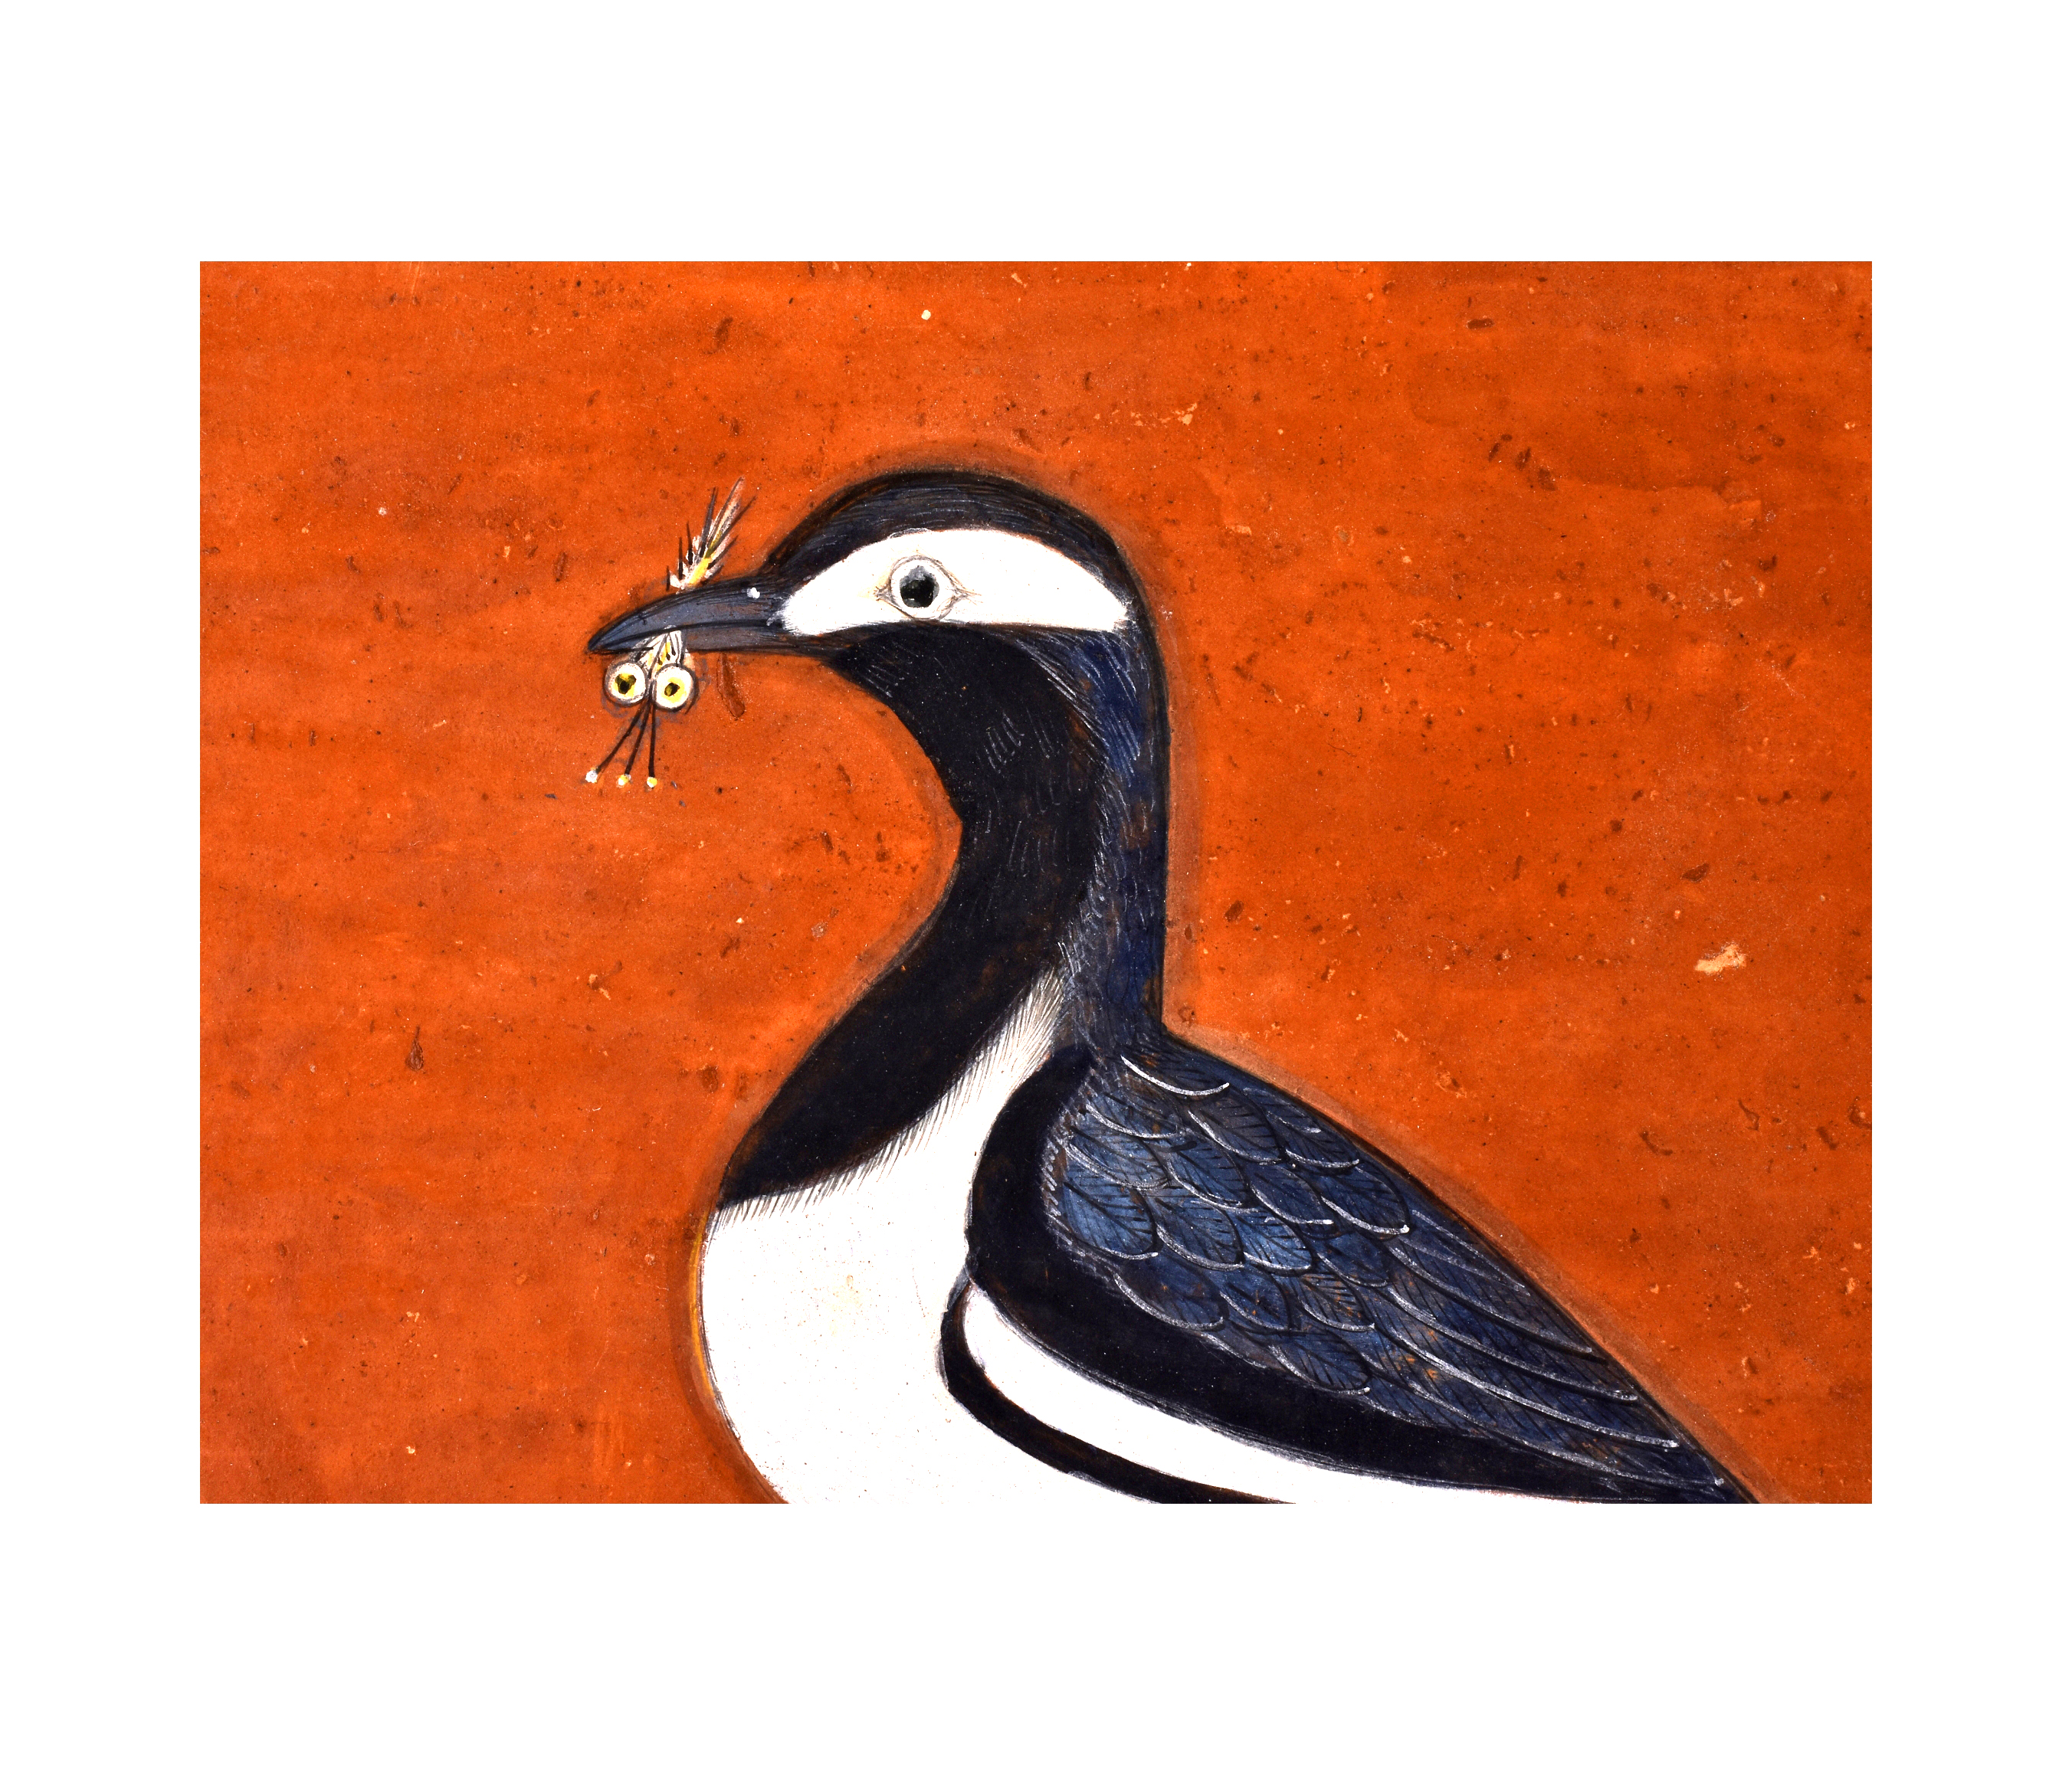 A PAHARI/BASHOLI BIRD WITH AN INSECT PREY IN HIS BEAK, 18TH CENTURY, INDIA - Image 3 of 3